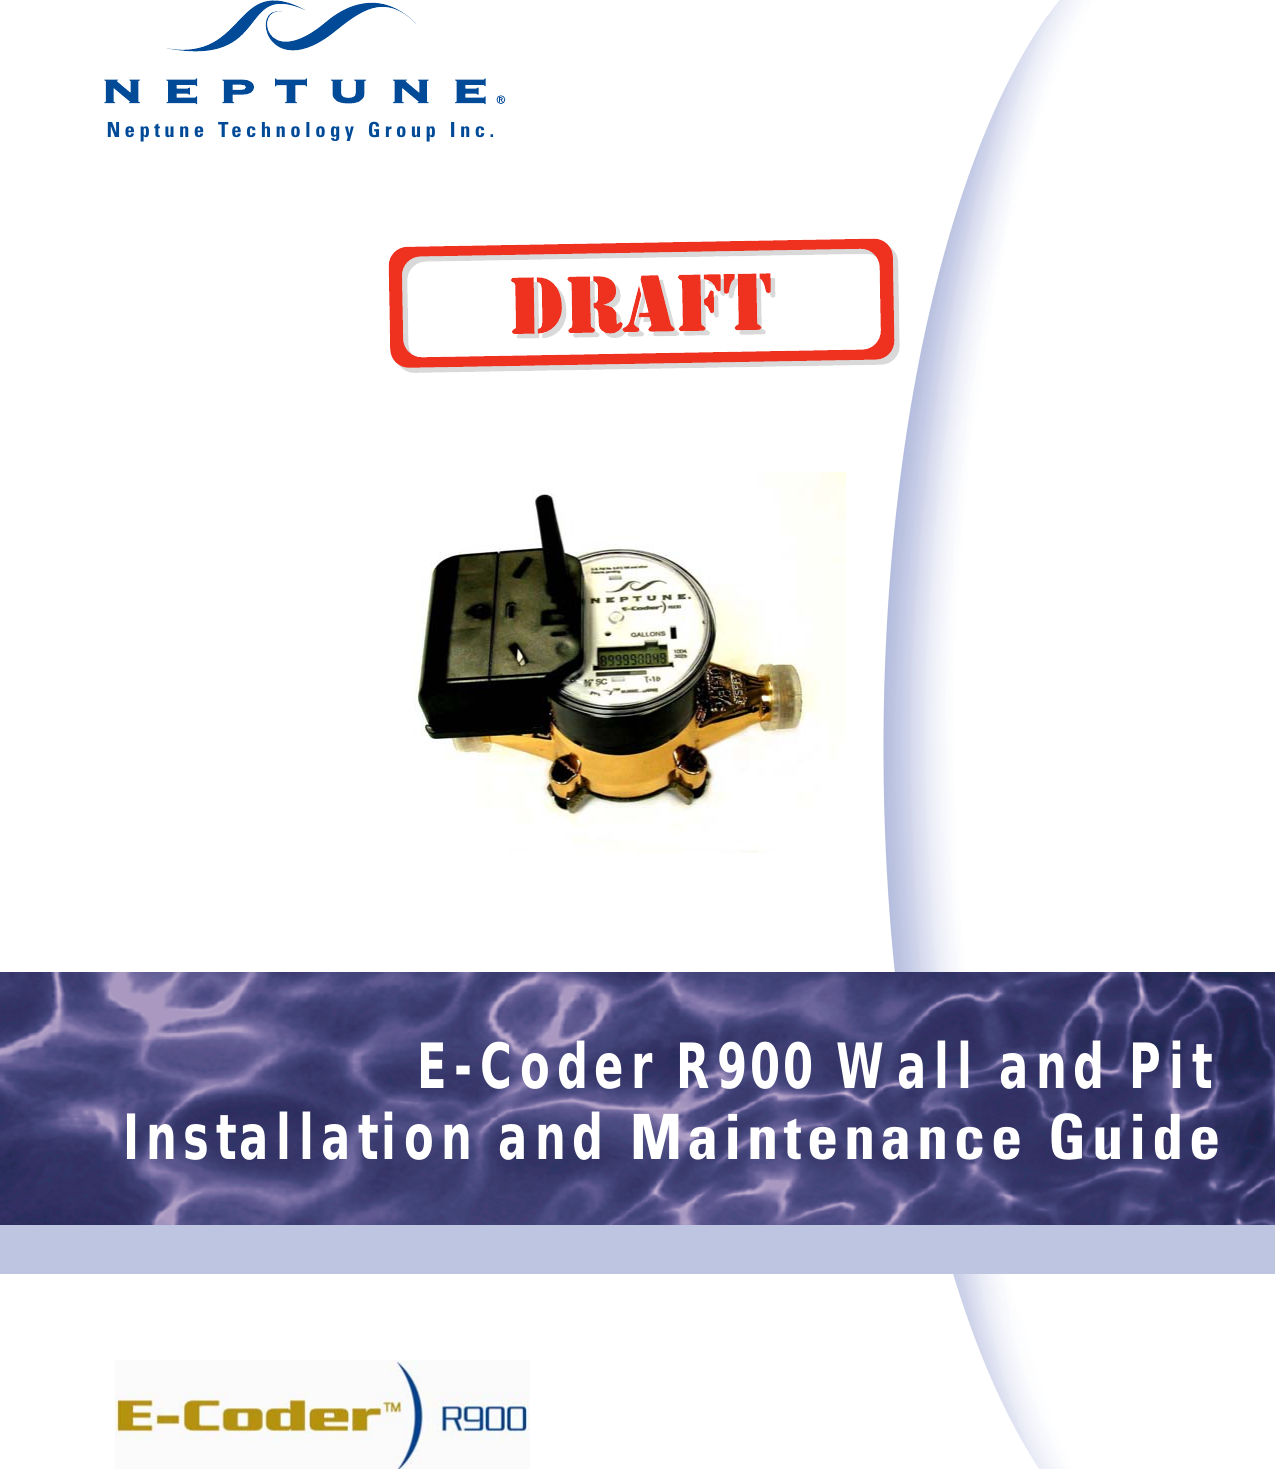       E-Coder R900 Wall and Pit     Installation and Maintenance GuideNeptune Technology Group Inc.